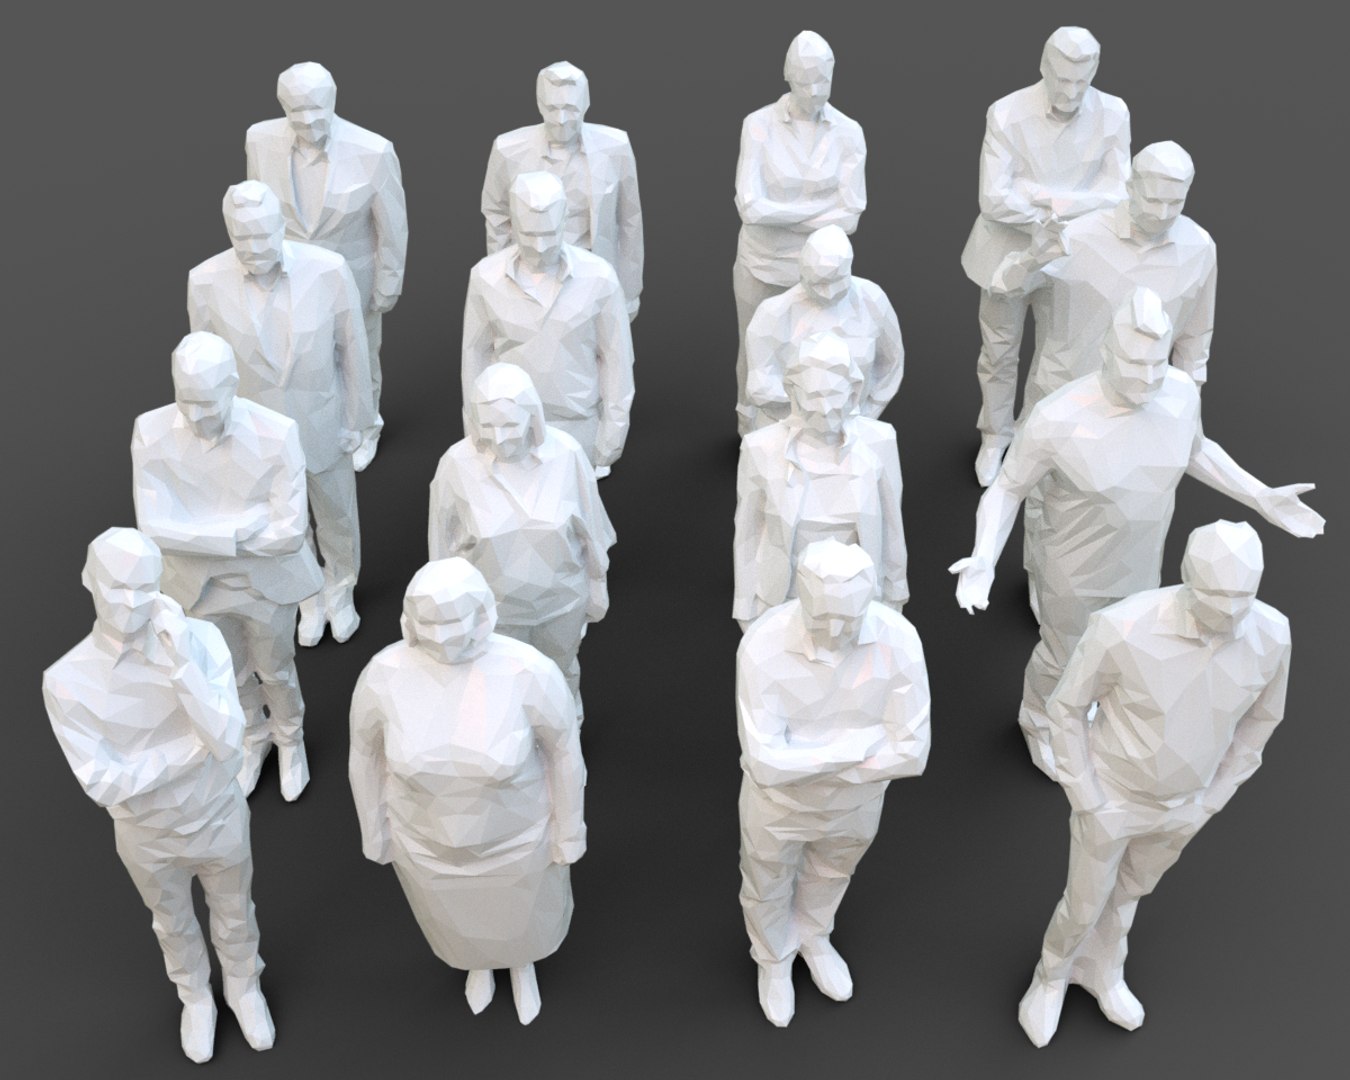 3D model architectural stylized human character | 1147642 | TurboSquid